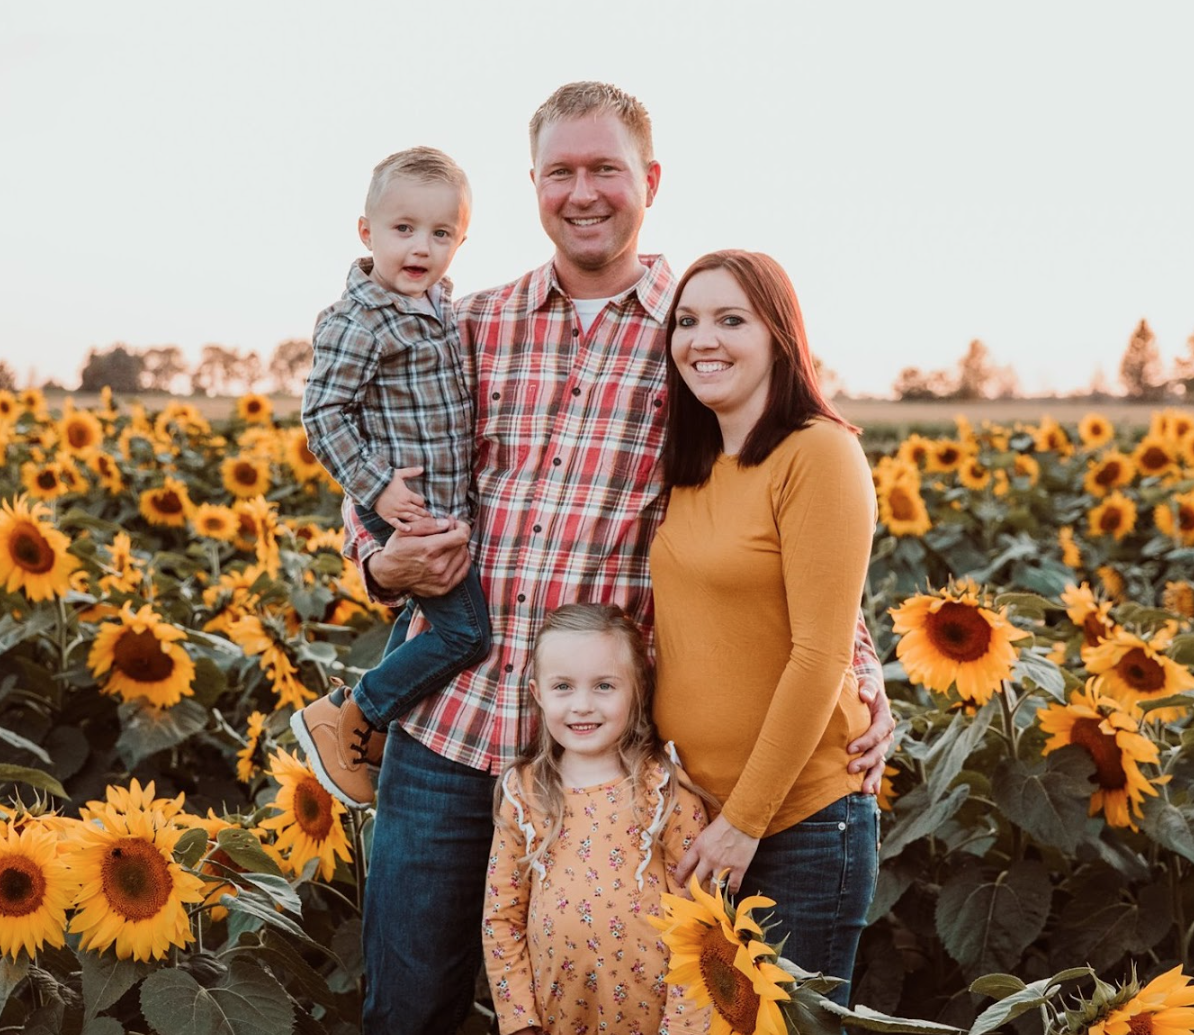 adam, kayla and kids stand in a field of sunflowers